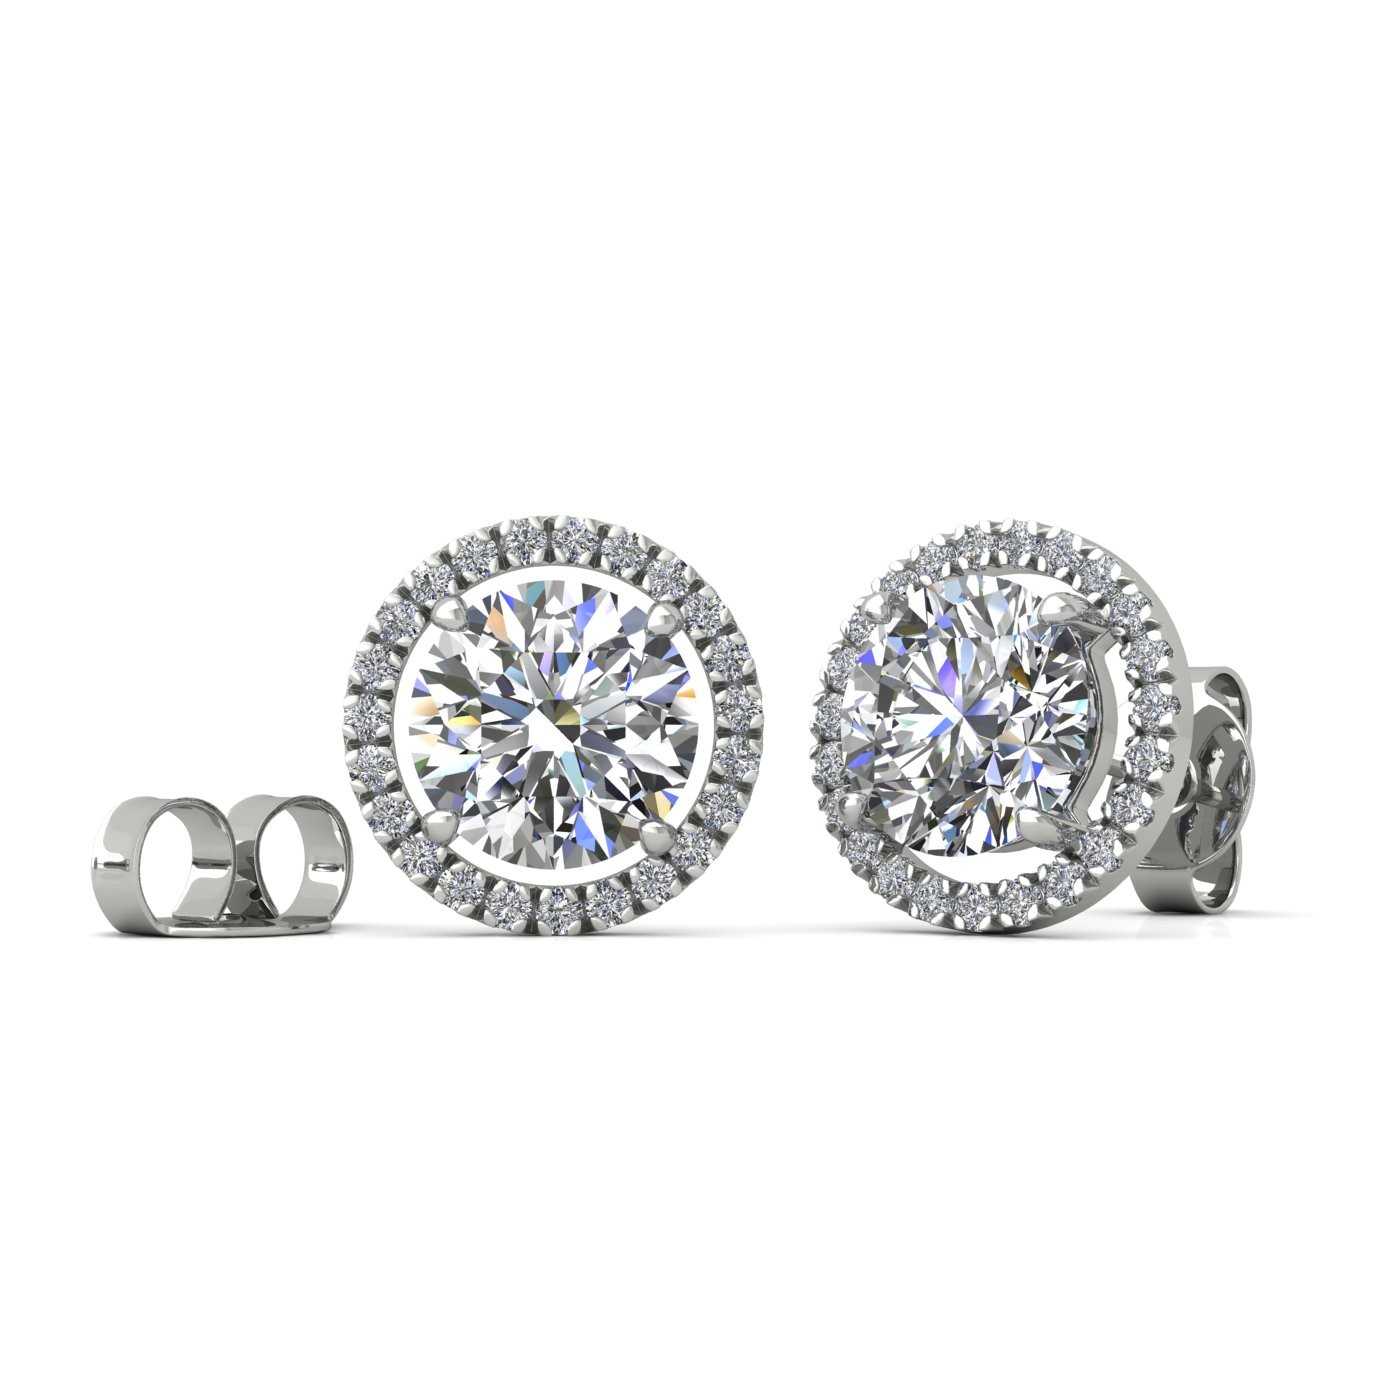 18k white gold  2,5 ct each (5 tcw) 4 prongs round brilliant cut halo diamond earring studs Photos & images